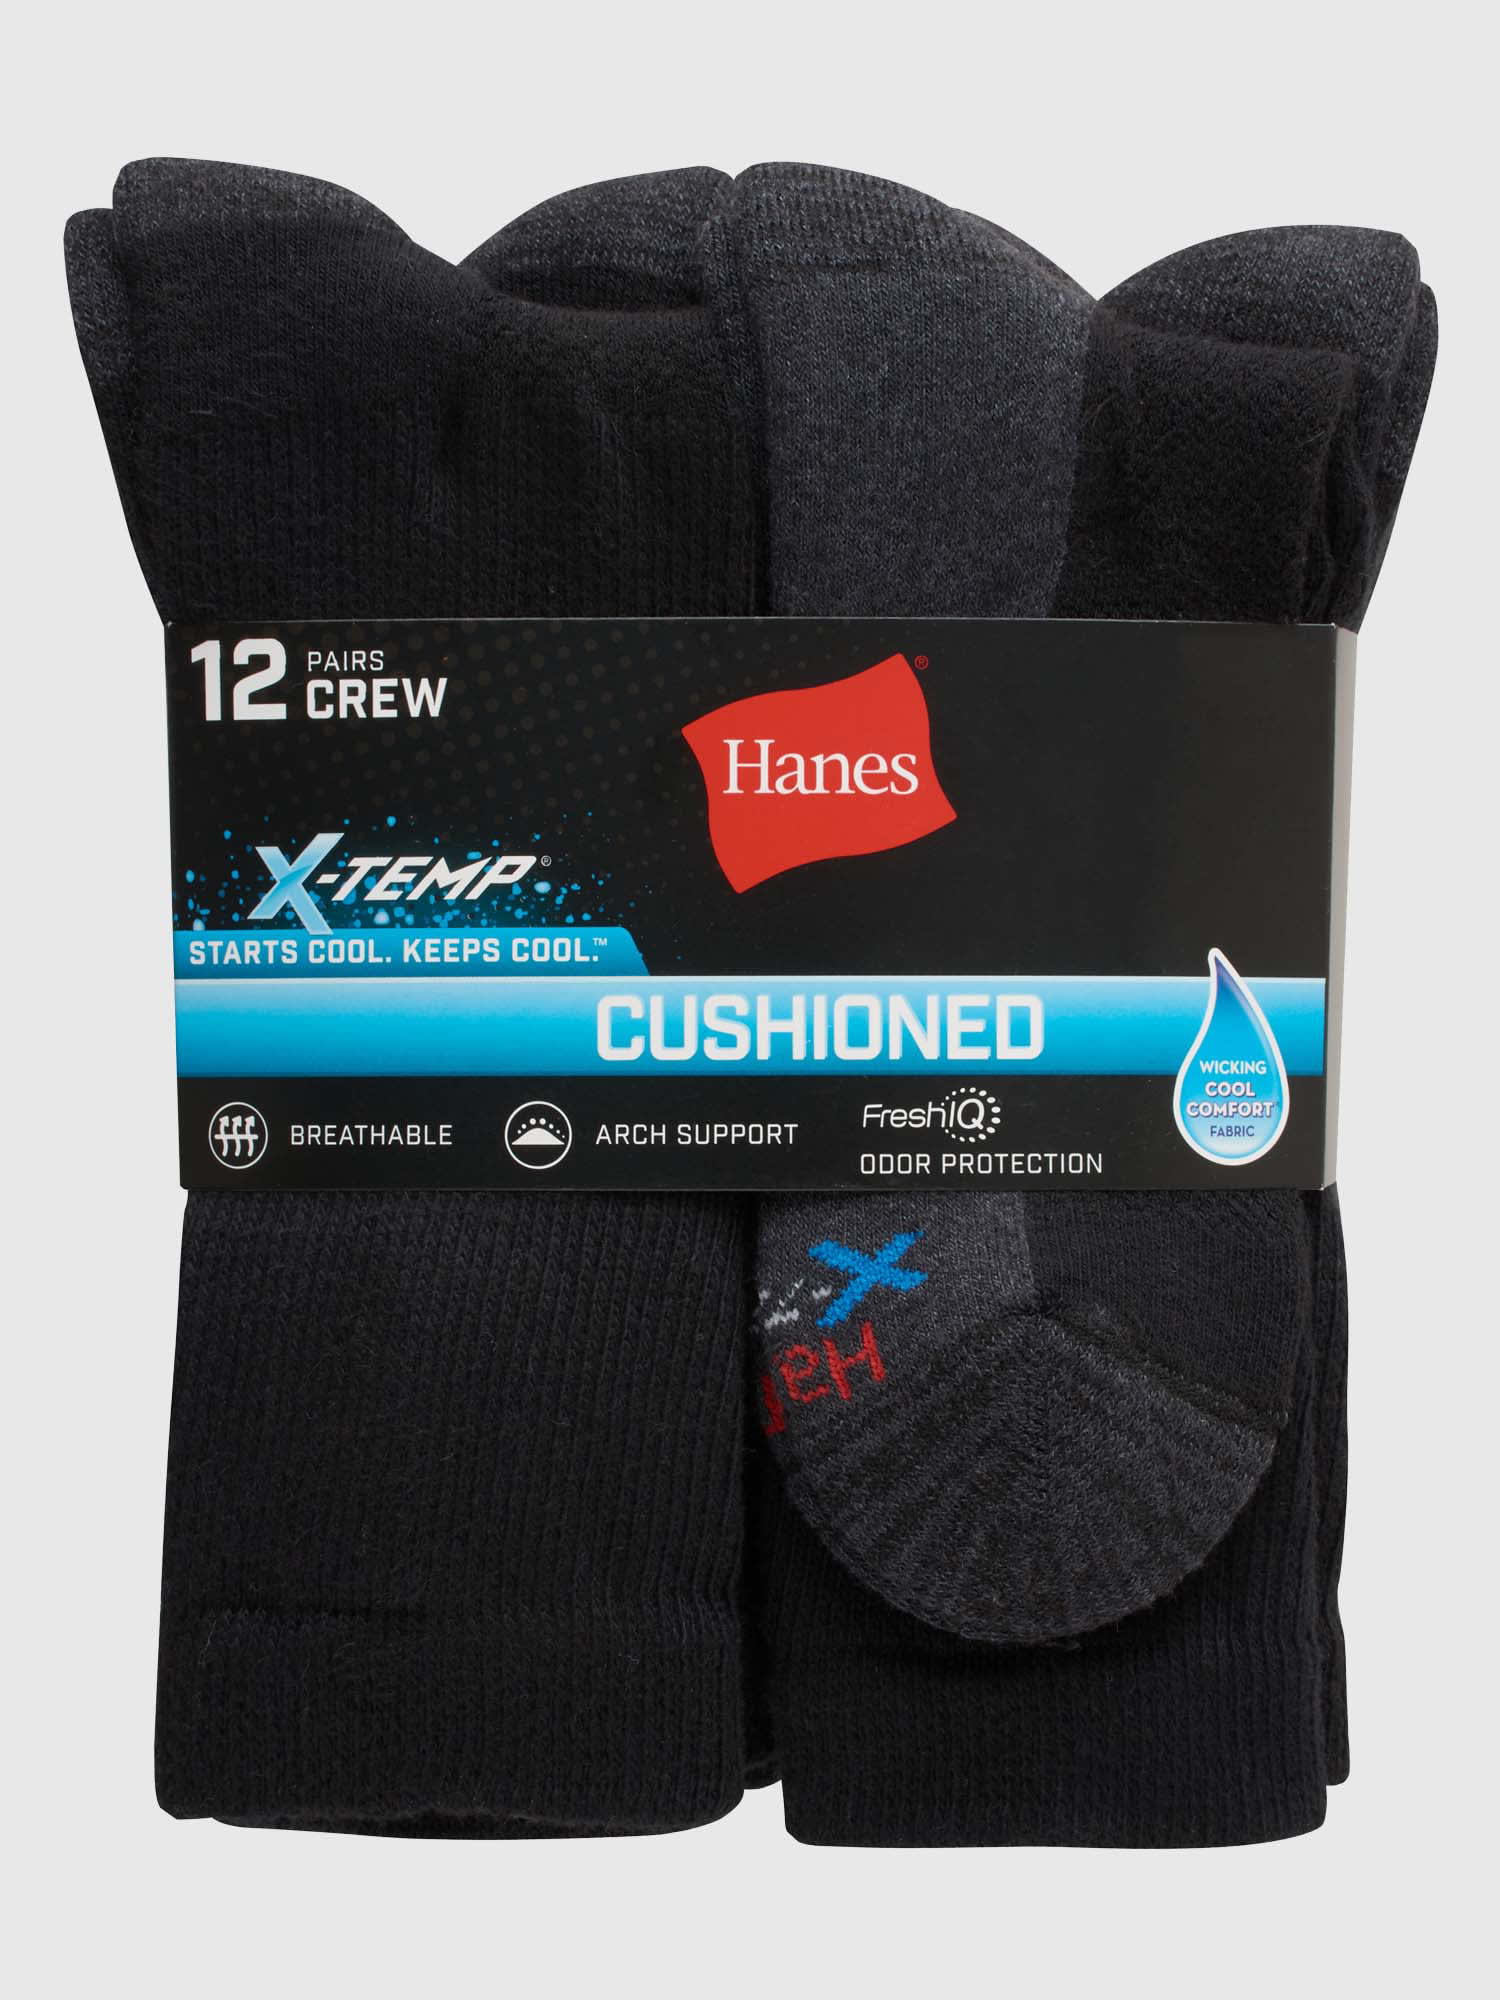 Hanes X-Temp Women's No-Show Socks, Extended Sizes, 6-Pairs